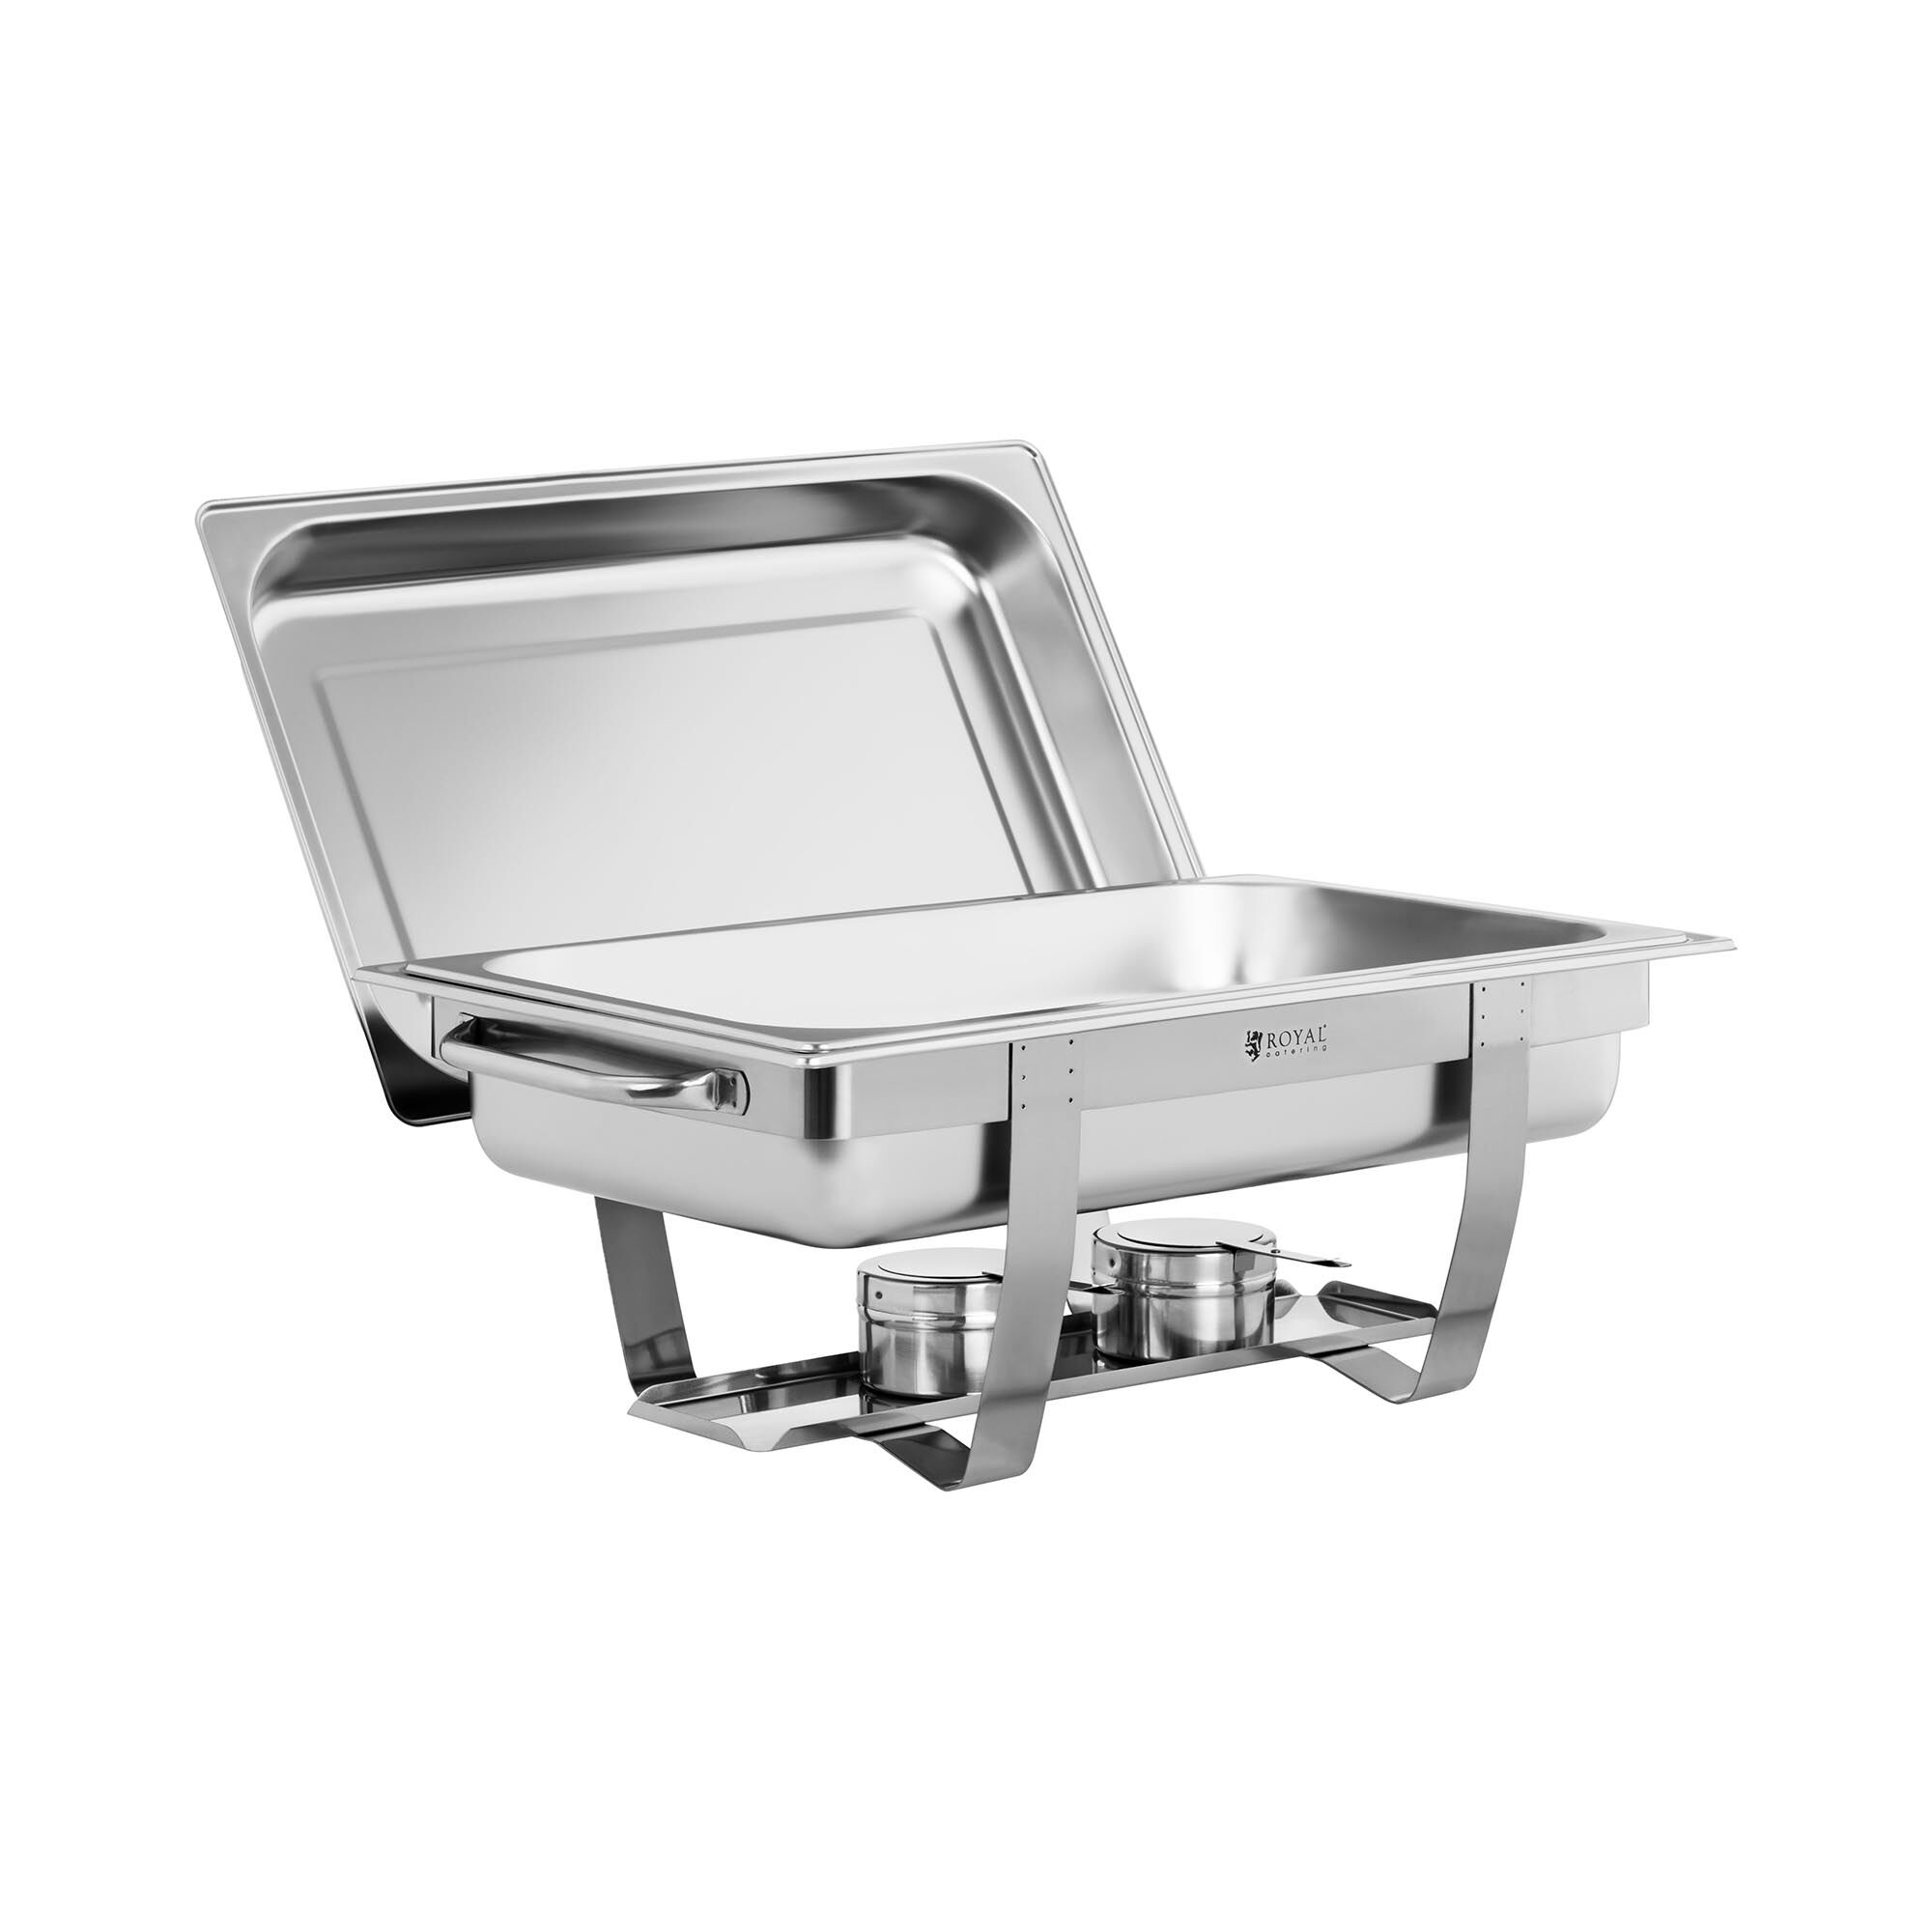 Royal Catering Chafing Dish - GN 1/1 - 8 L - 2 brandstofcontainers 10011370